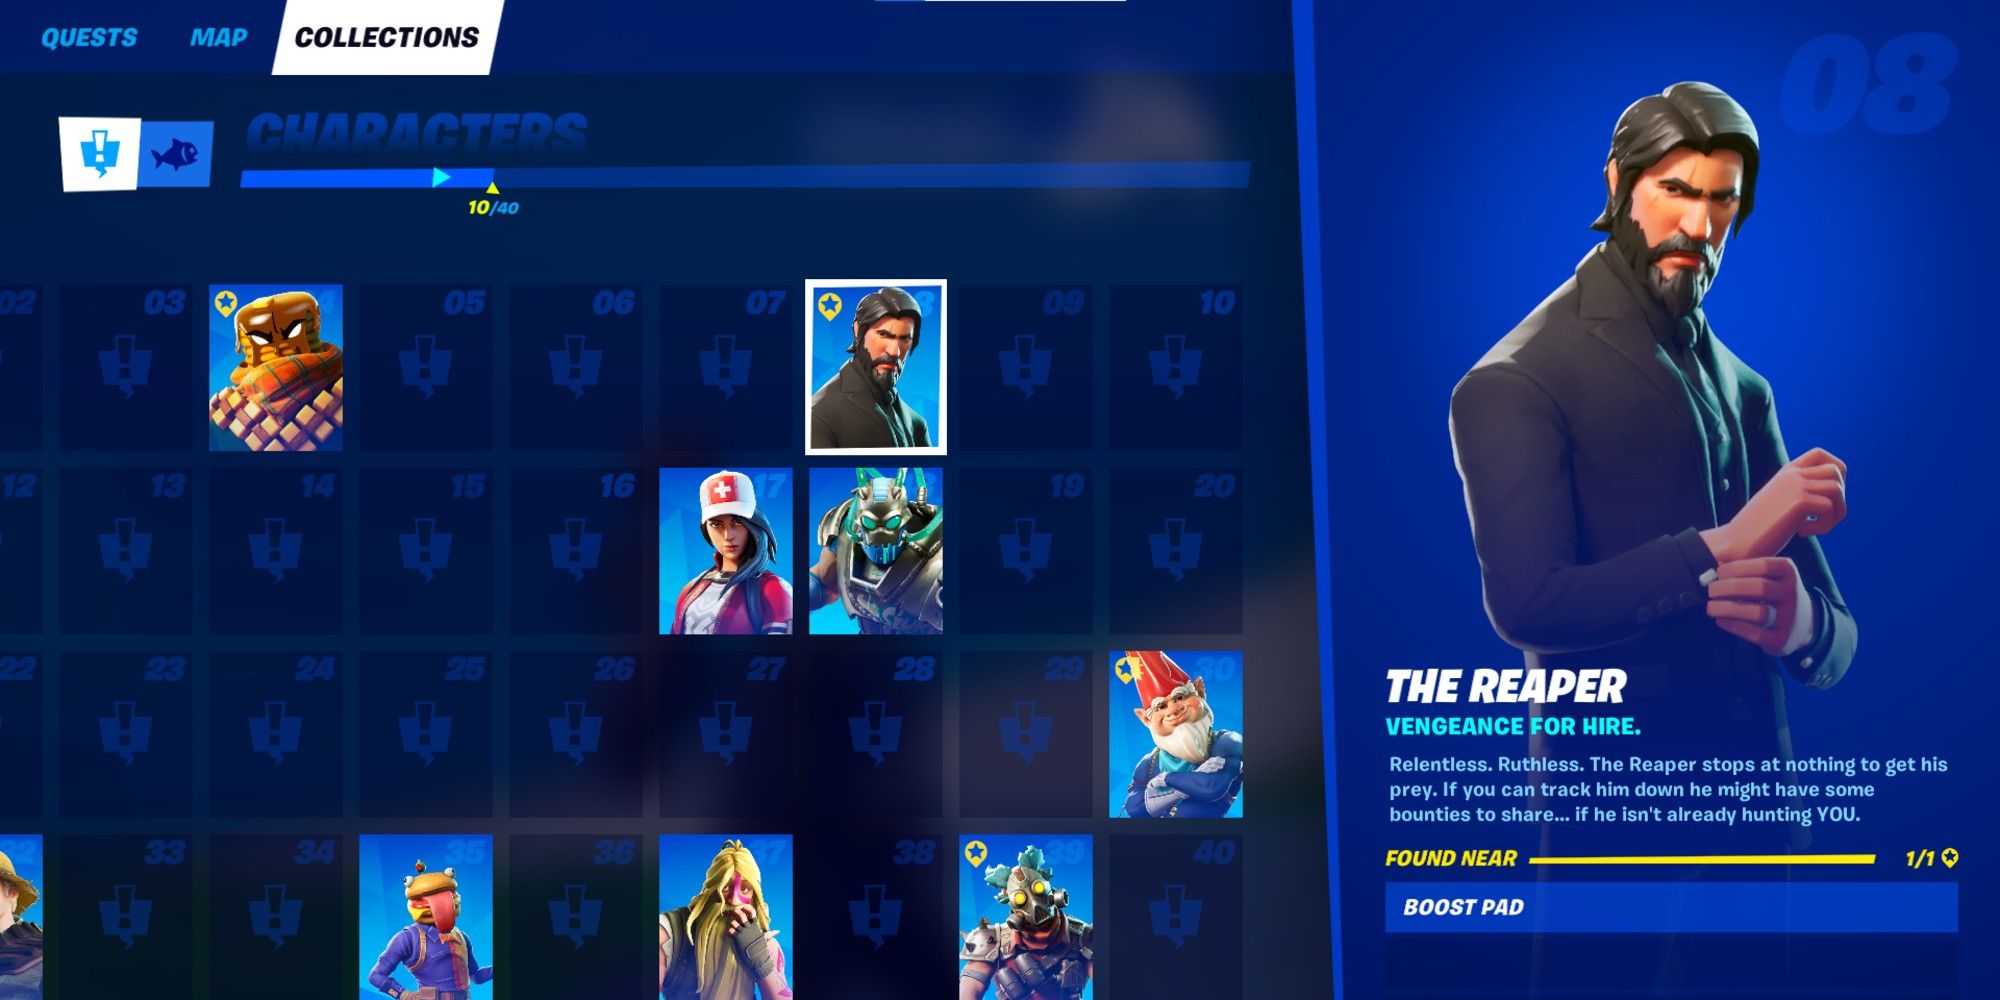 The Reaper in a player's collections in Fortnite Season 5